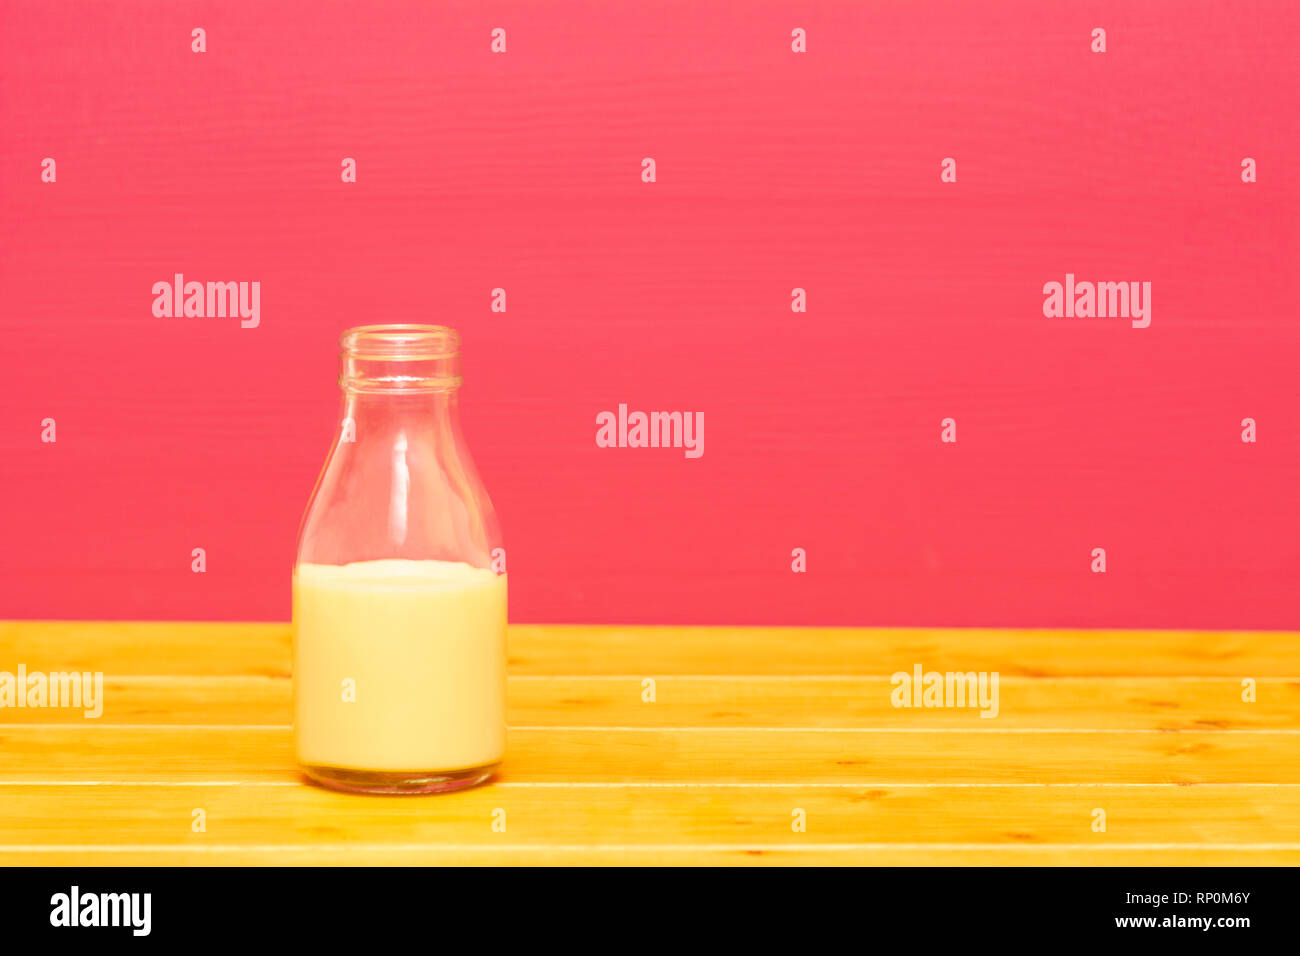 One-third pint glass milk bottle half full with banana milkshake, on a wooden table against a pink painted background Stock Photo